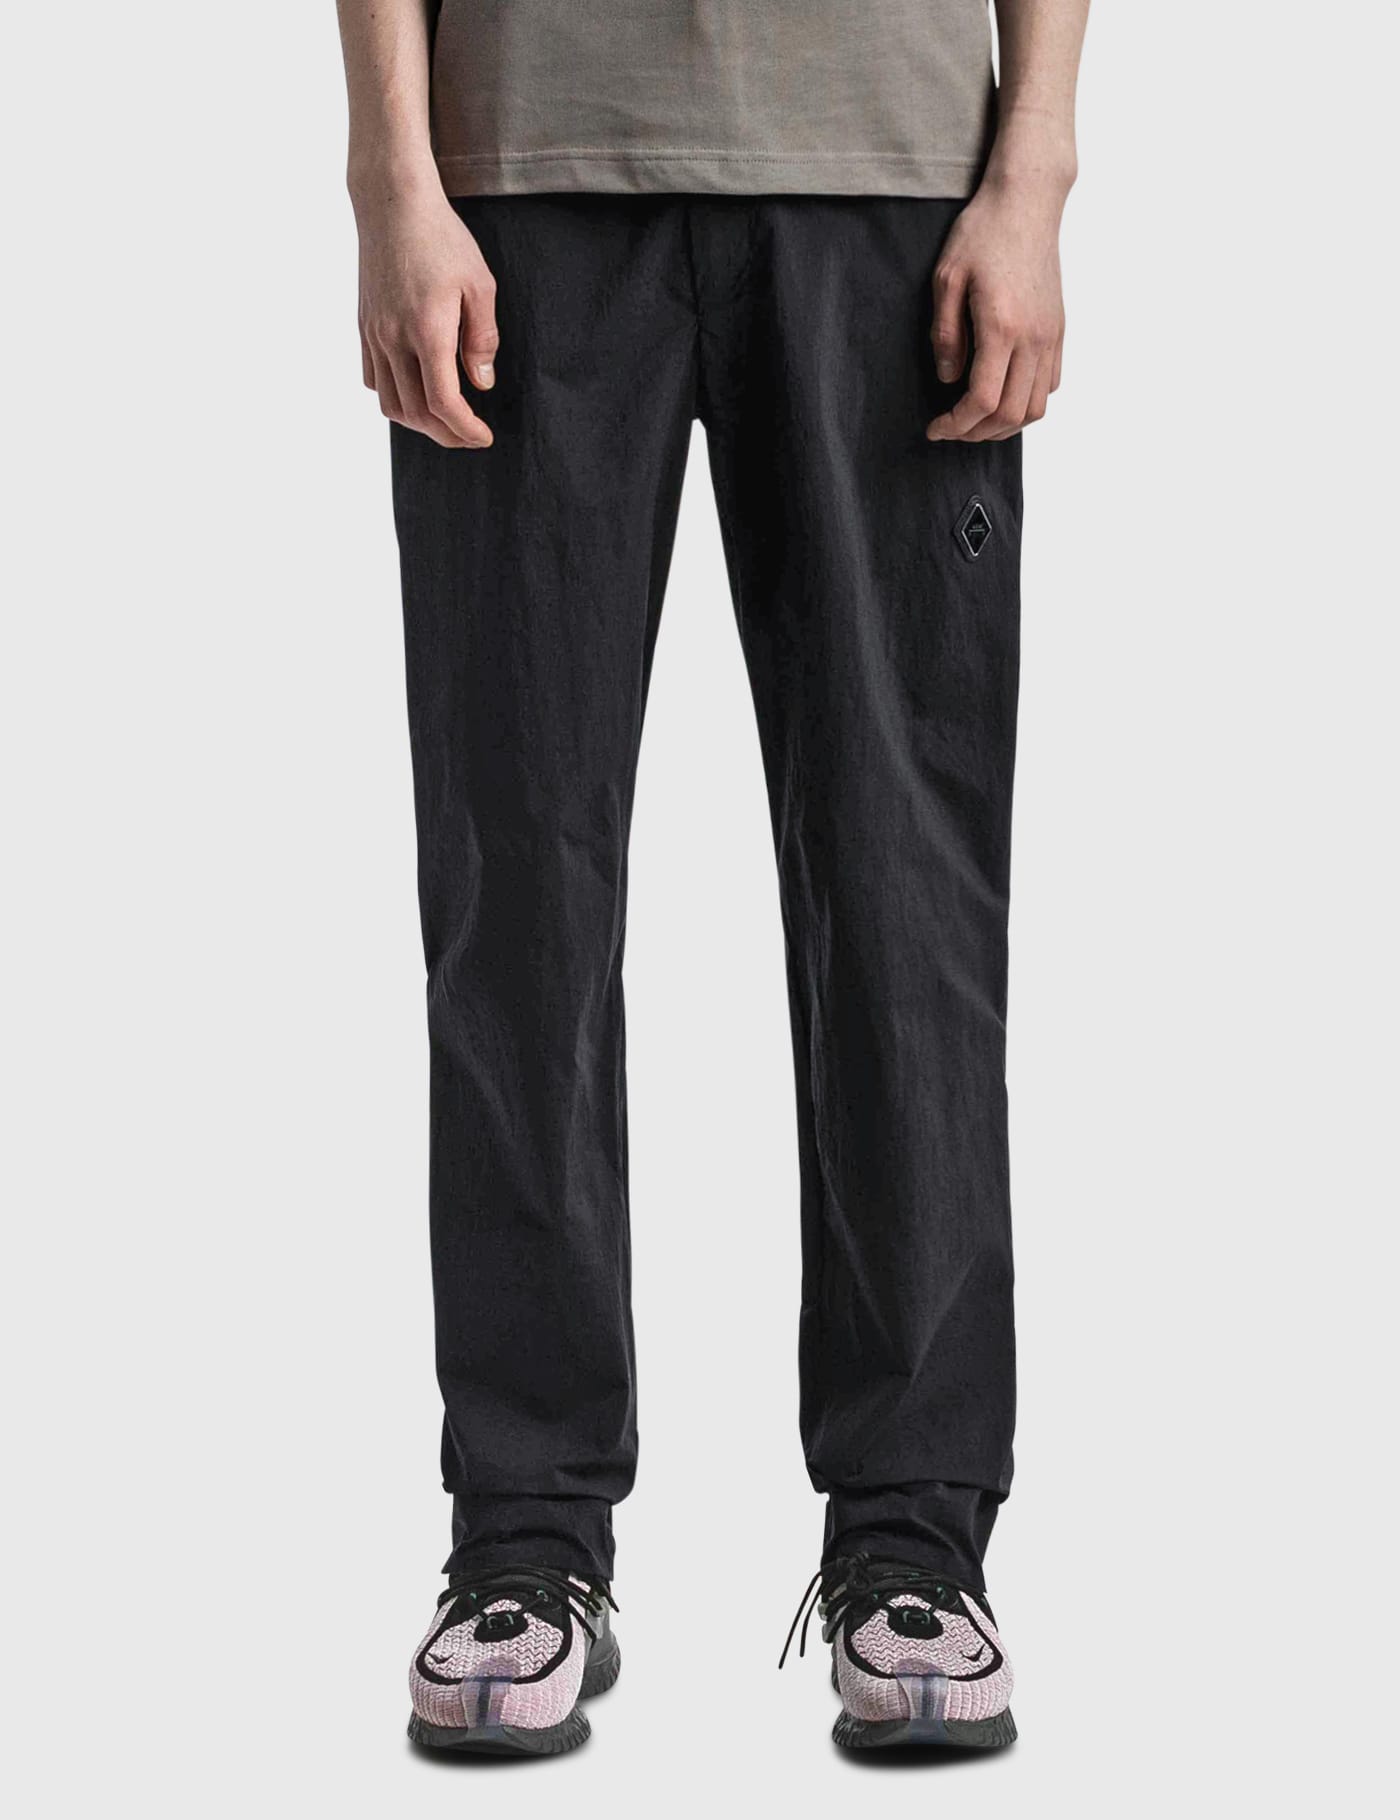 A-COLD-WALL* - Stealth Nylon Pants | HBX - Globally Curated 